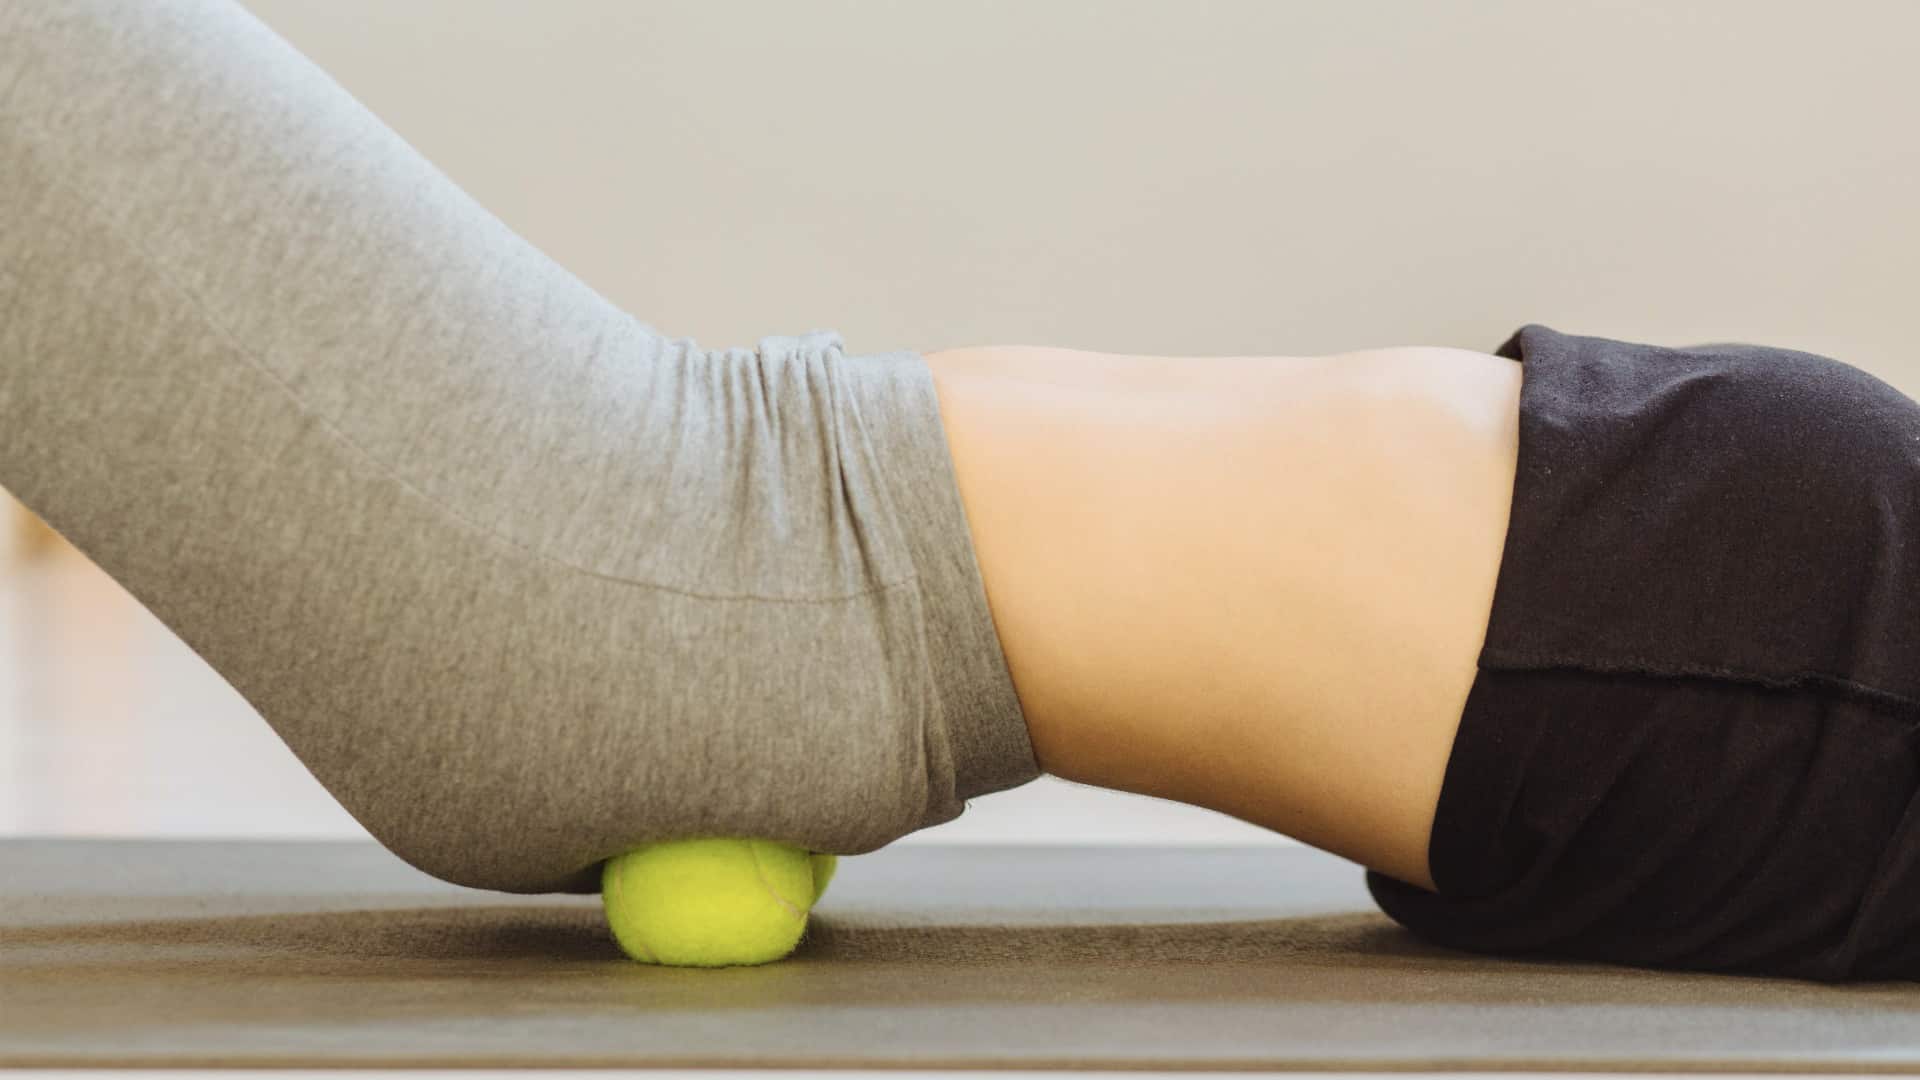 https://www.northeastspineandsports.com/wp-content/uploads/2021/09/How-to-Treat-Sciatica-5-Effective-Home-Exercises-The-Tennis-Ball-Trick-IMG2.jpg